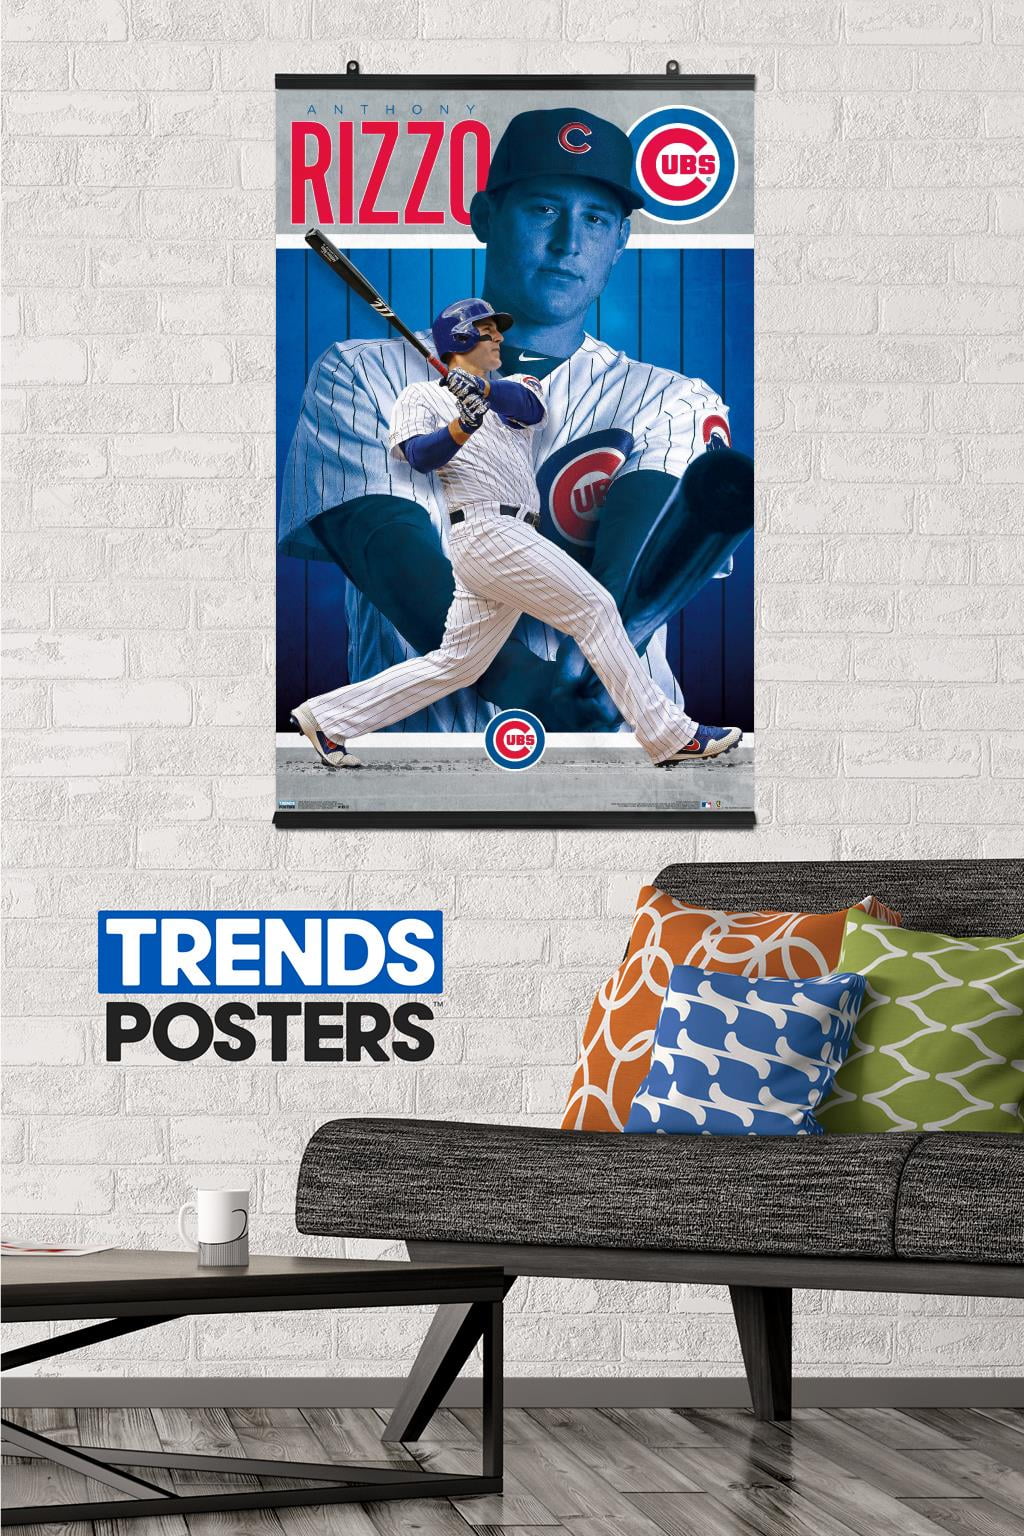 MLB Chicago Cubs - Anthony Rizzo 20 Wall Poster, 22.375 x 34 